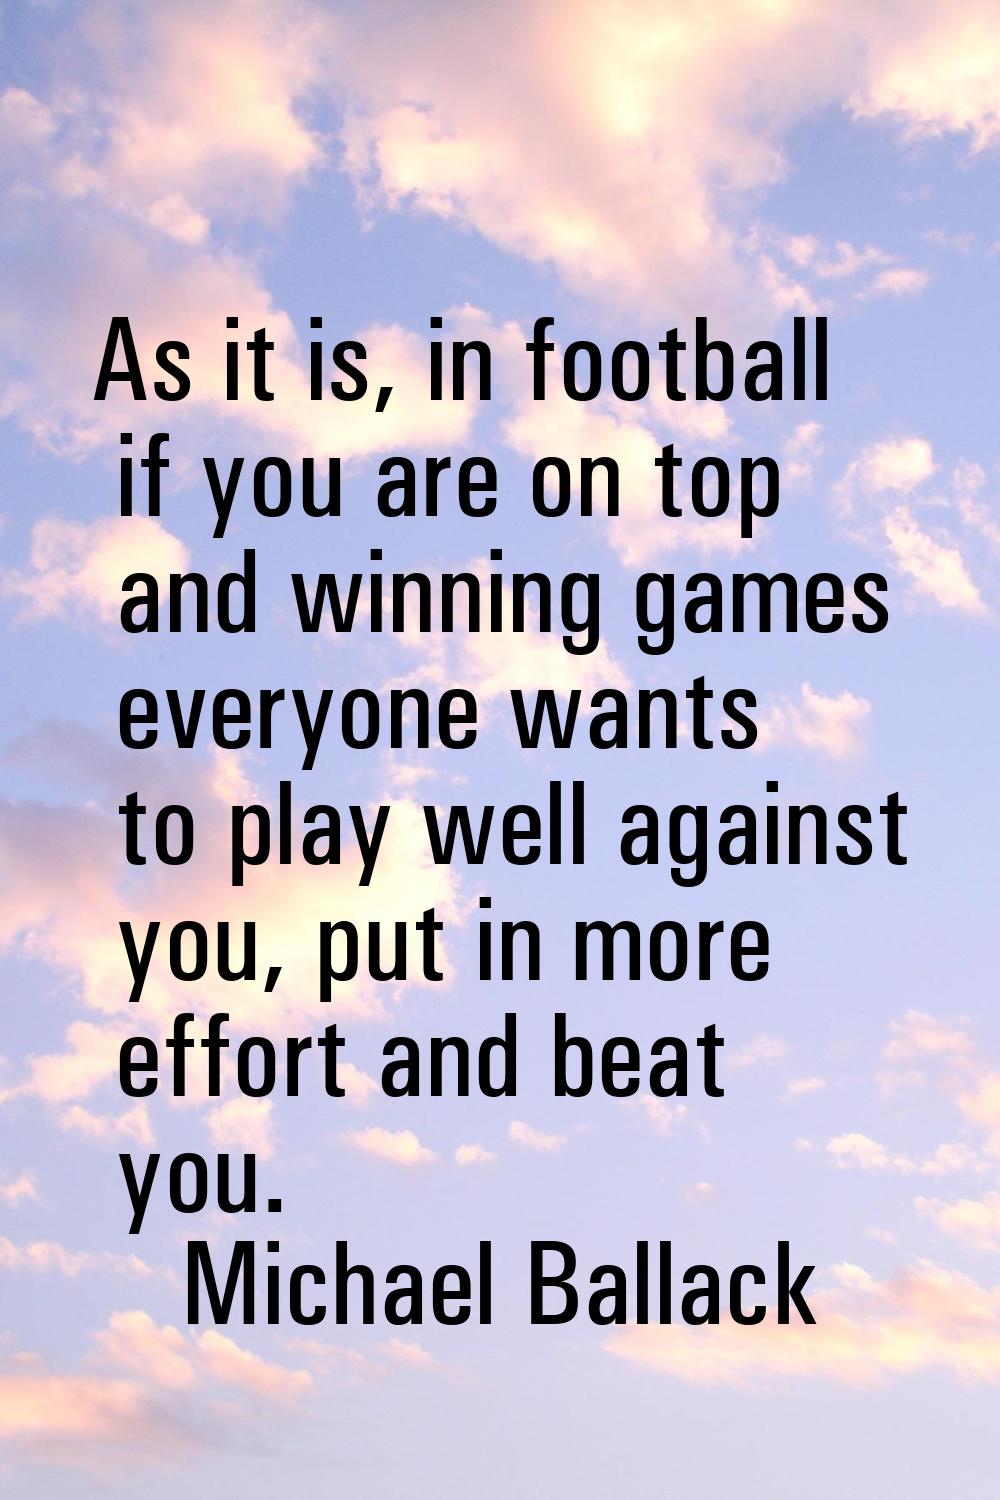 As it is, in football if you are on top and winning games everyone wants to play well against you, 